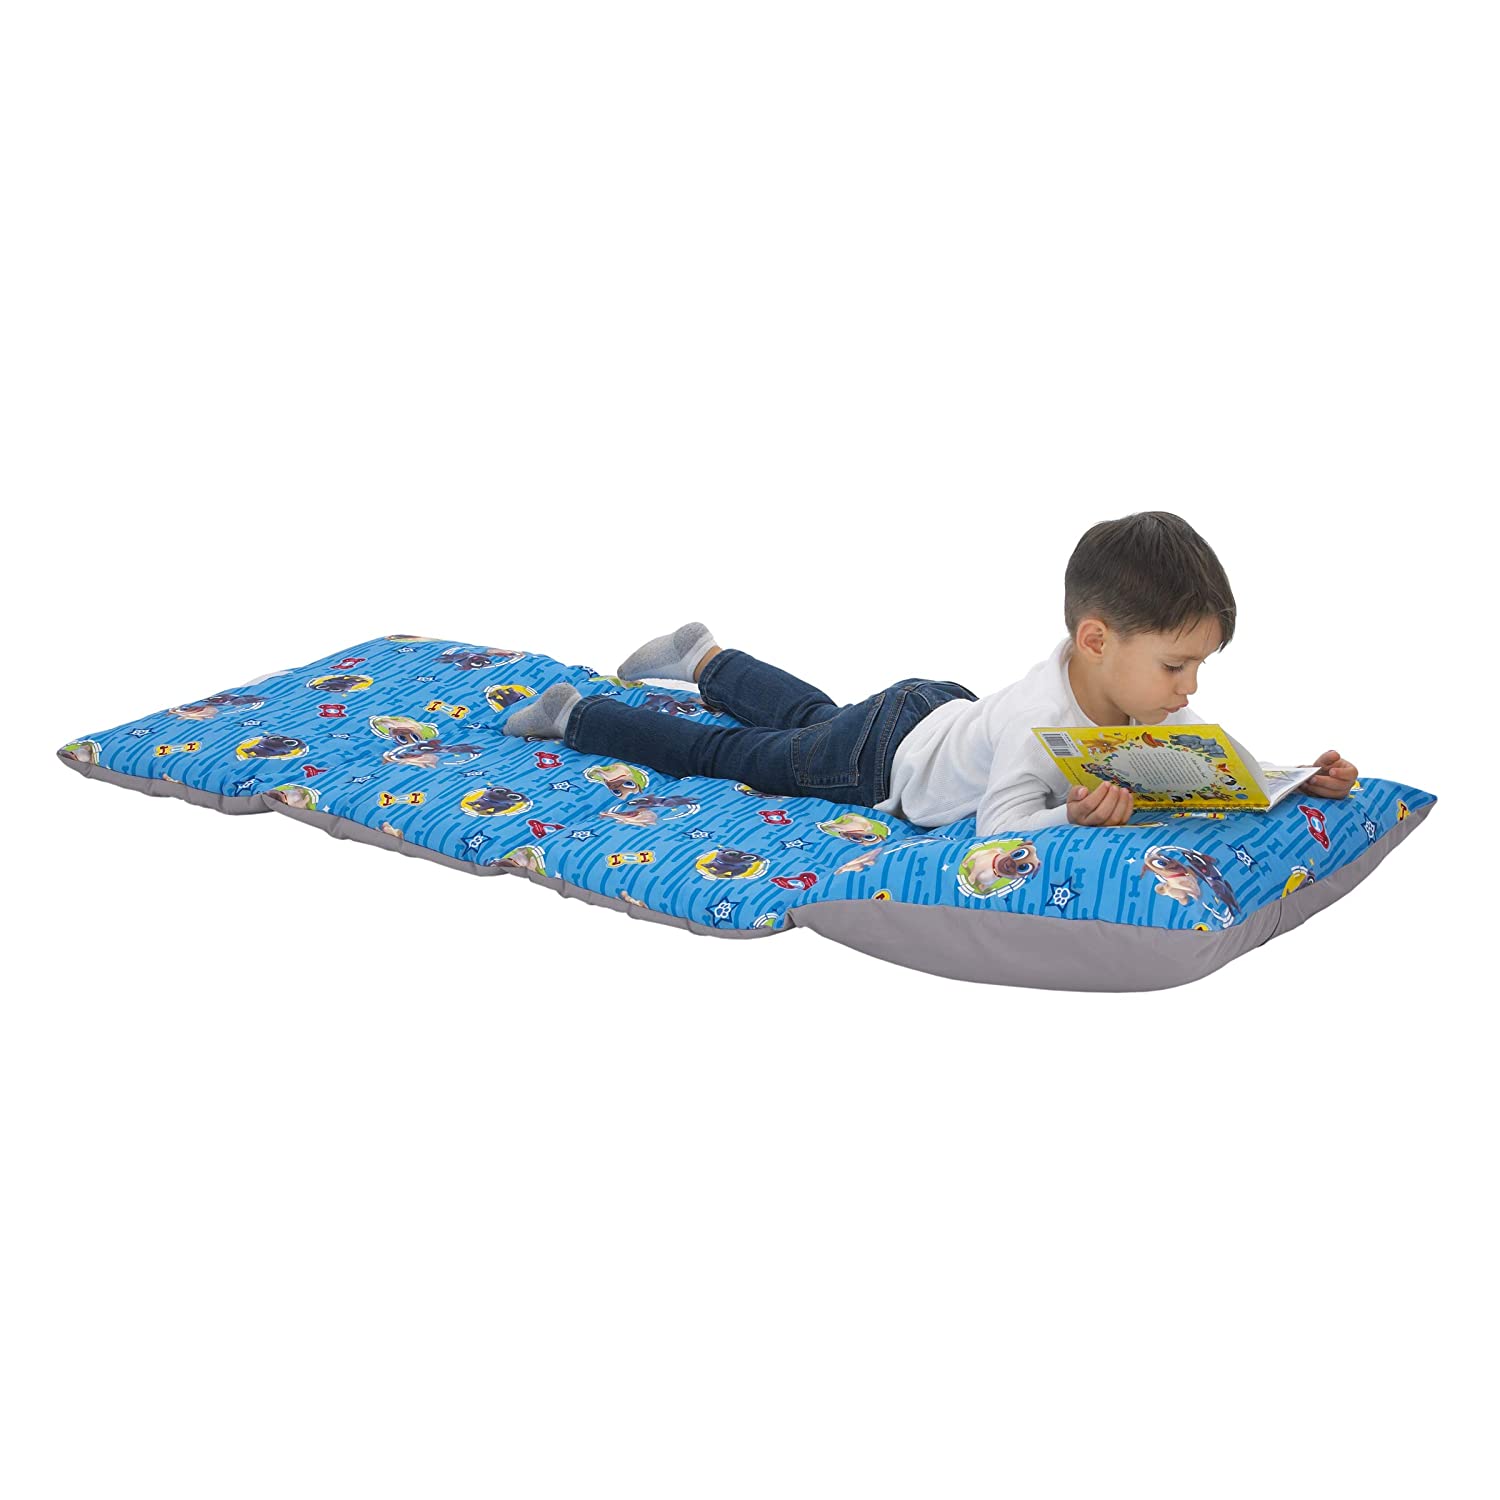 Disney Puppy Dog Pals - Blue, Grey, Yellow & Red Deluxe Easy Fold Toddler Nap Mat, 26'' x 62''